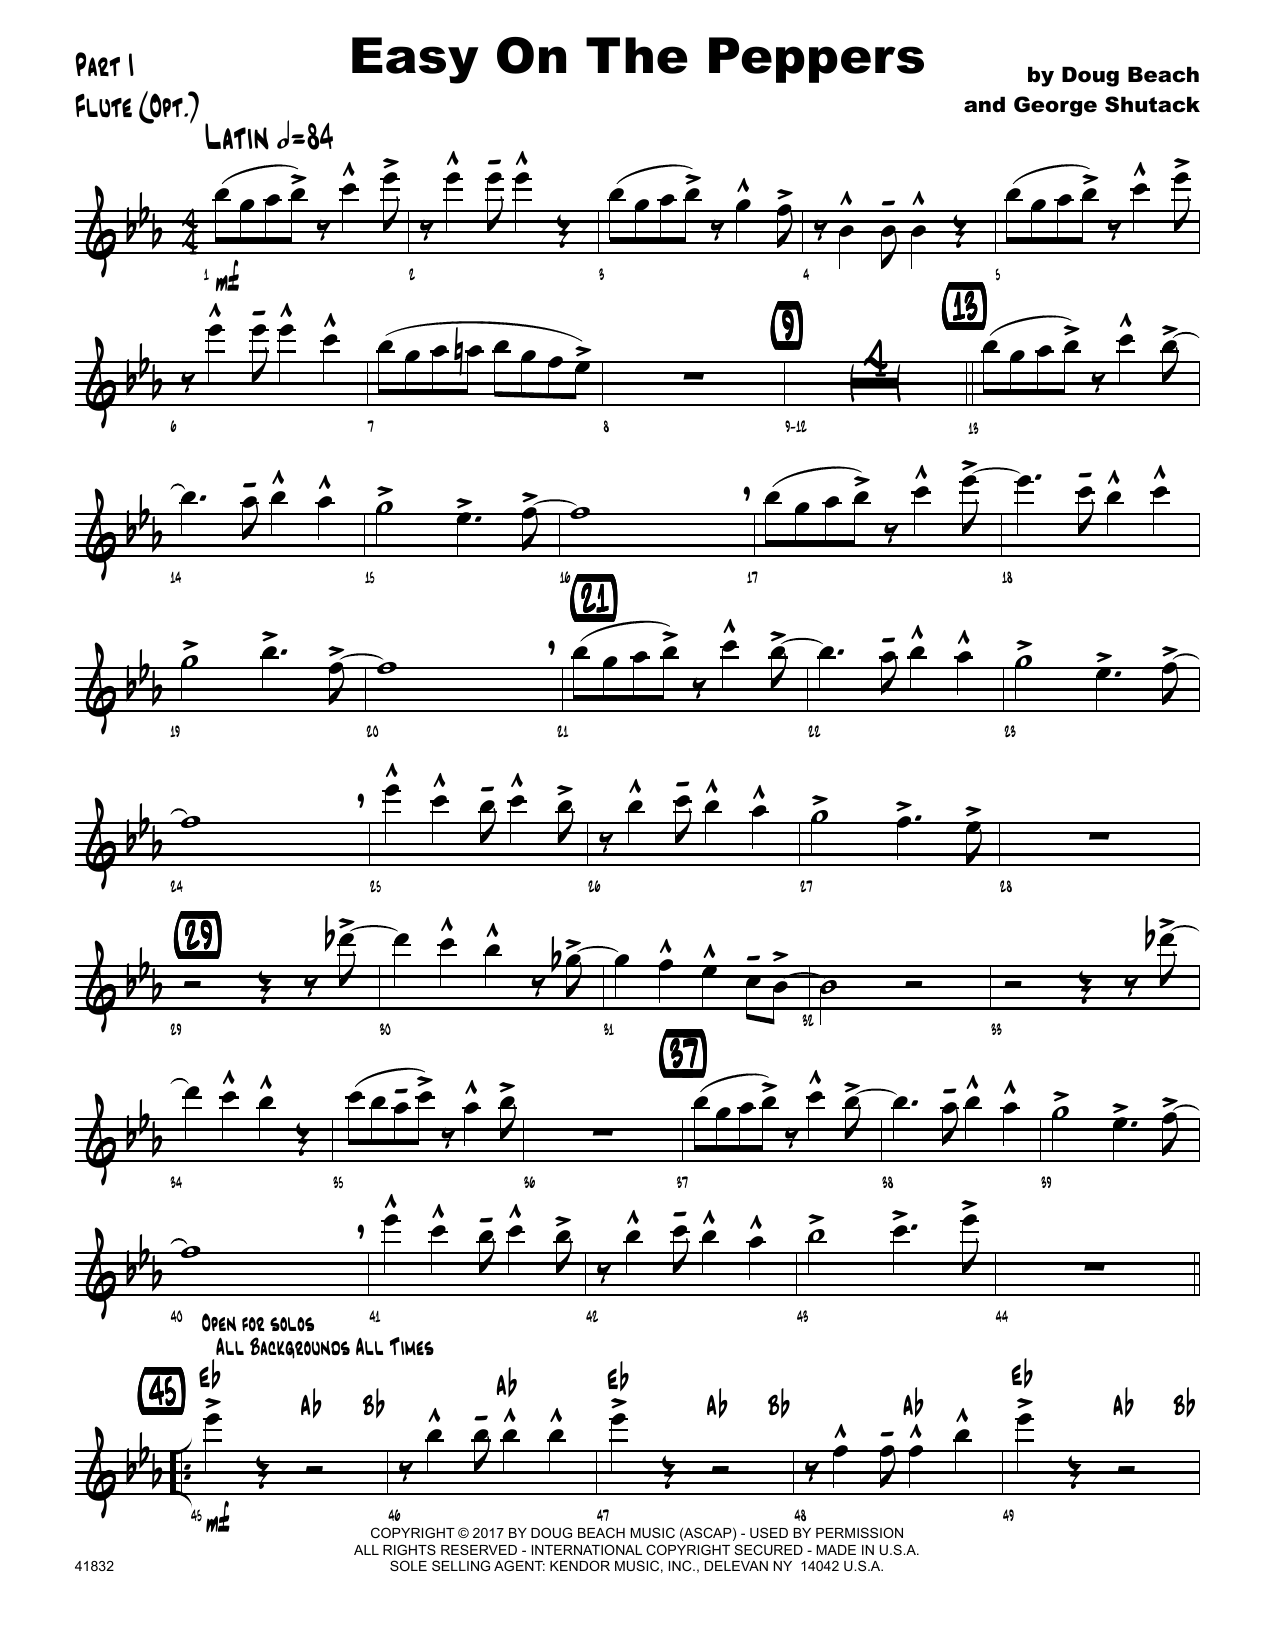 Download Doug Beach & George Shutack Easy On The Peppers - Flute Sheet Music